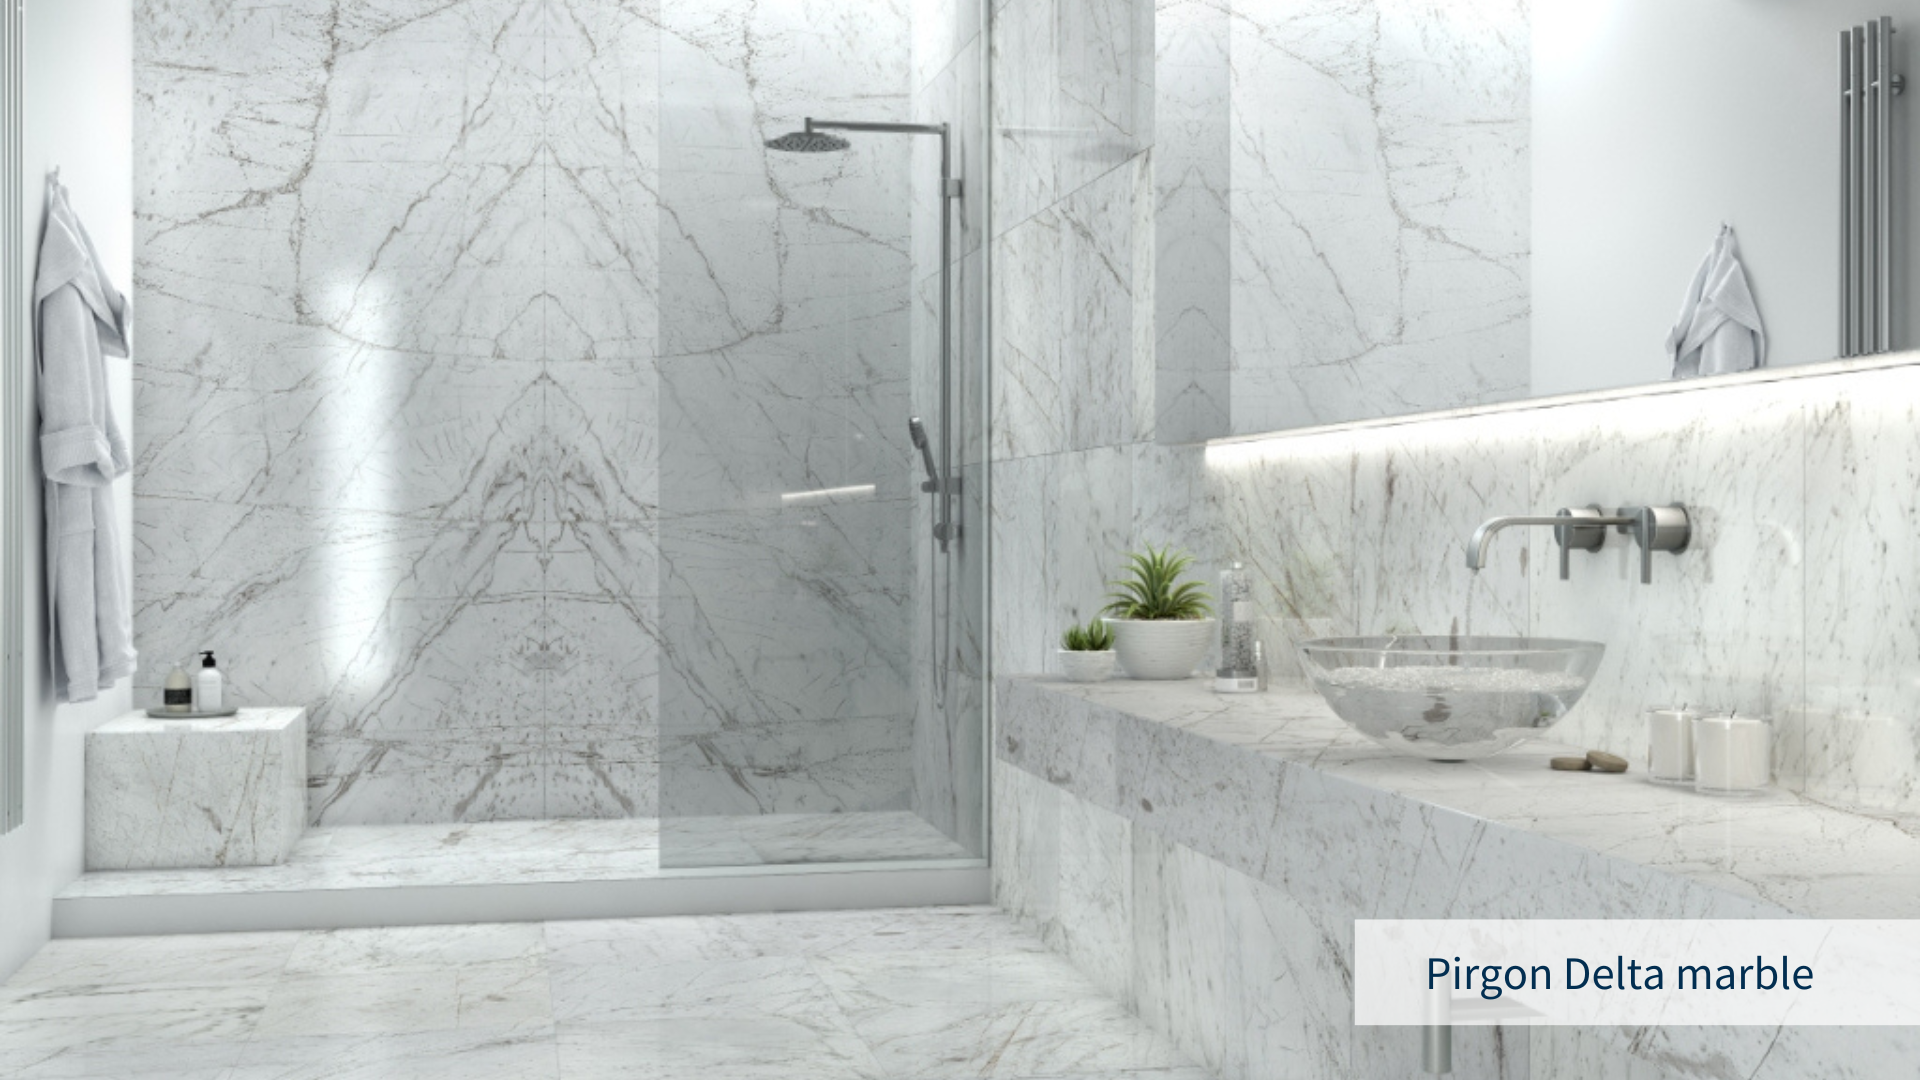 Luxurious total white bathroom and shower with slabs and tiles of Greek white Pirgon Delta marble